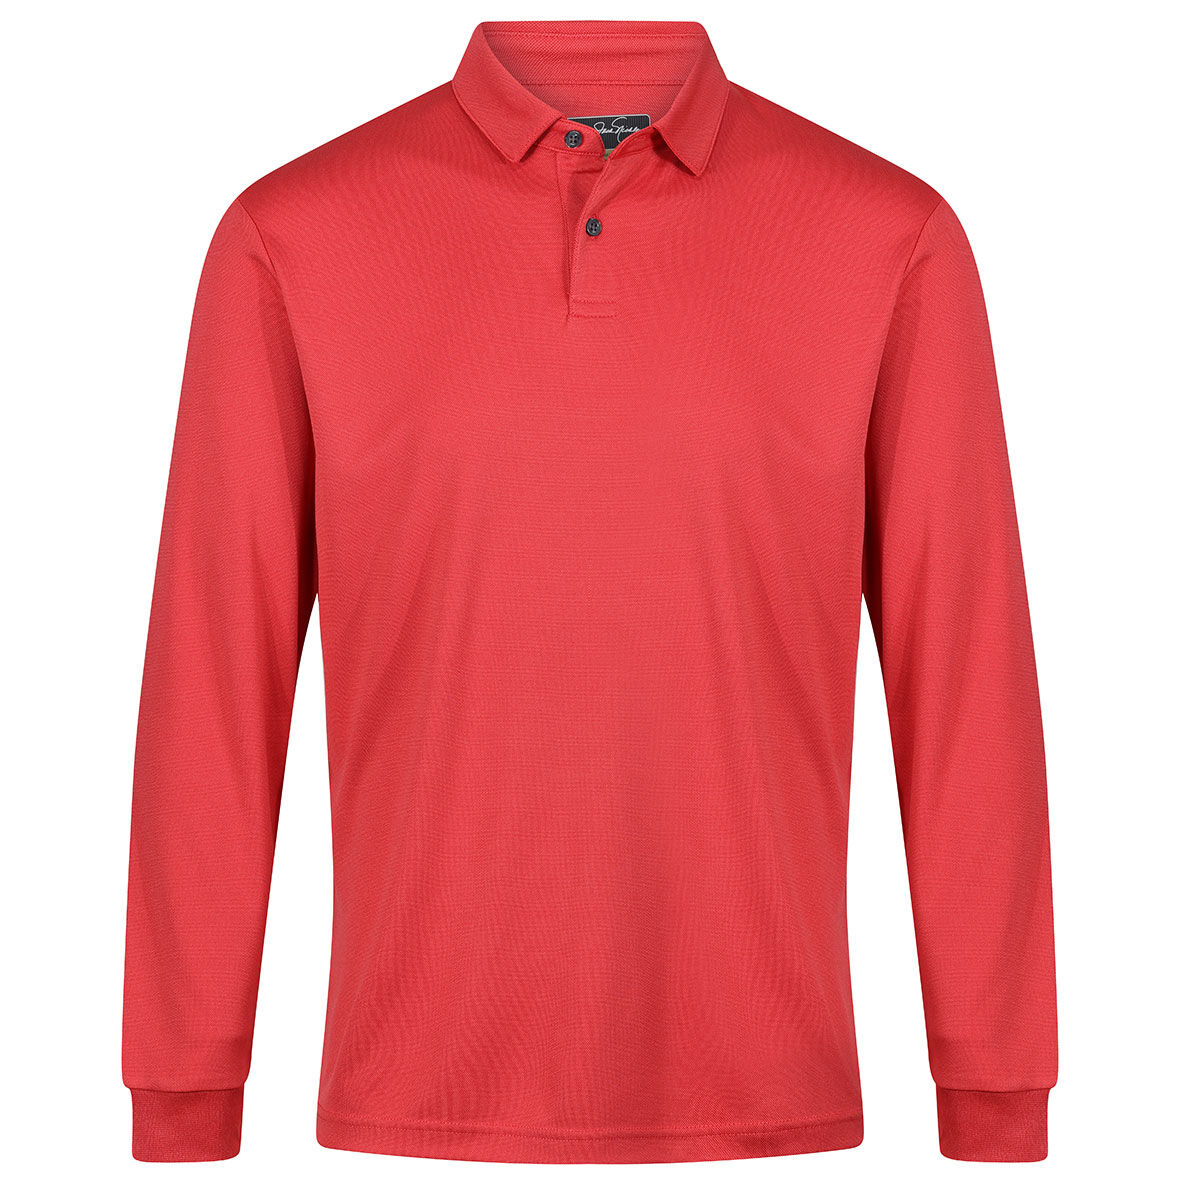 Jack Nicklaus Men's Classic Long Sleeve Golf Polo Shirt, Mens, Red, Large | American Golf von Jack Nicklaus